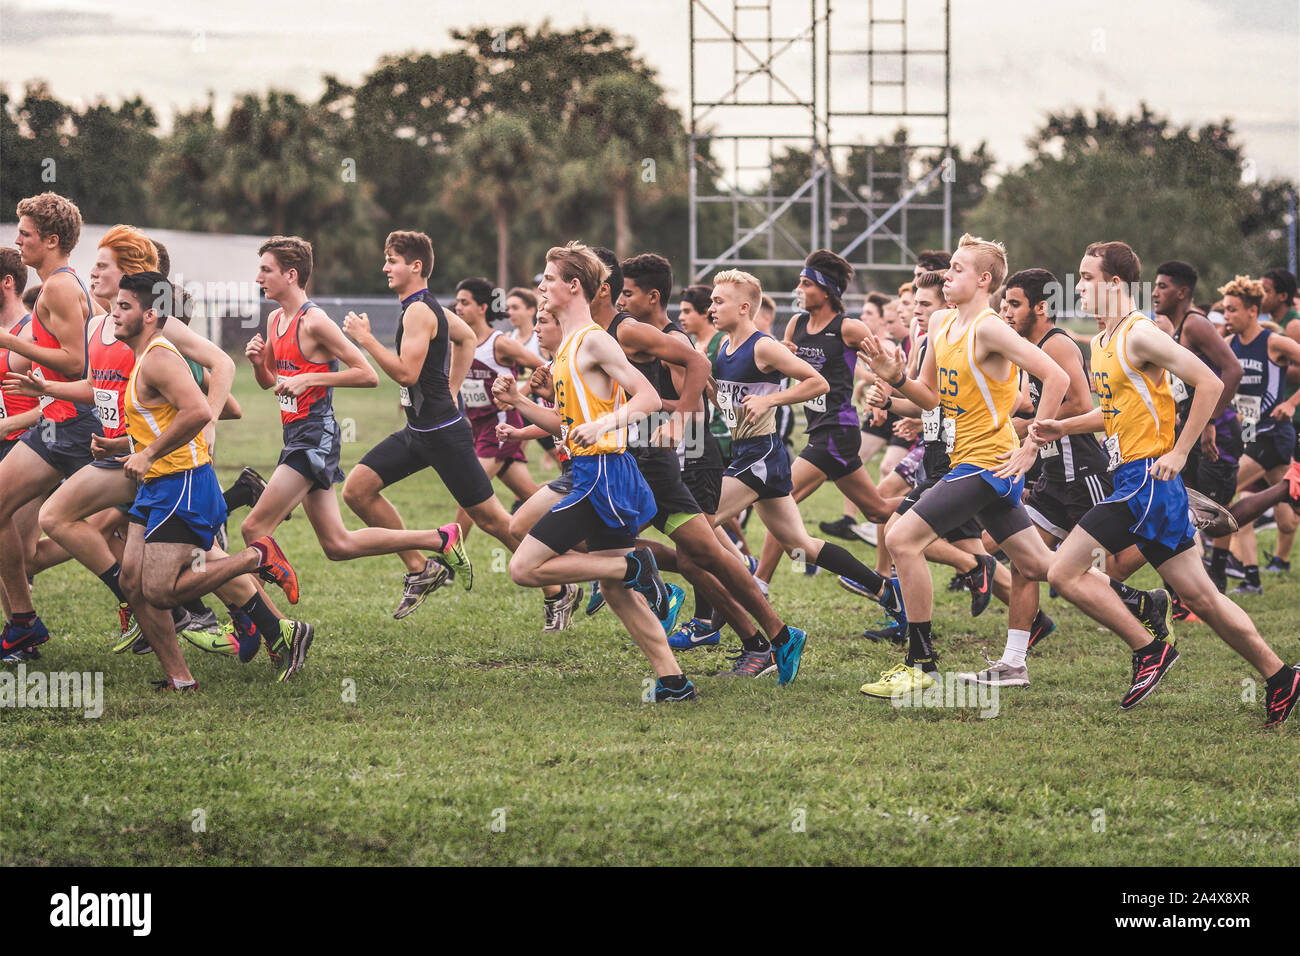 Male runners at start of high school cross country race Stock Photo